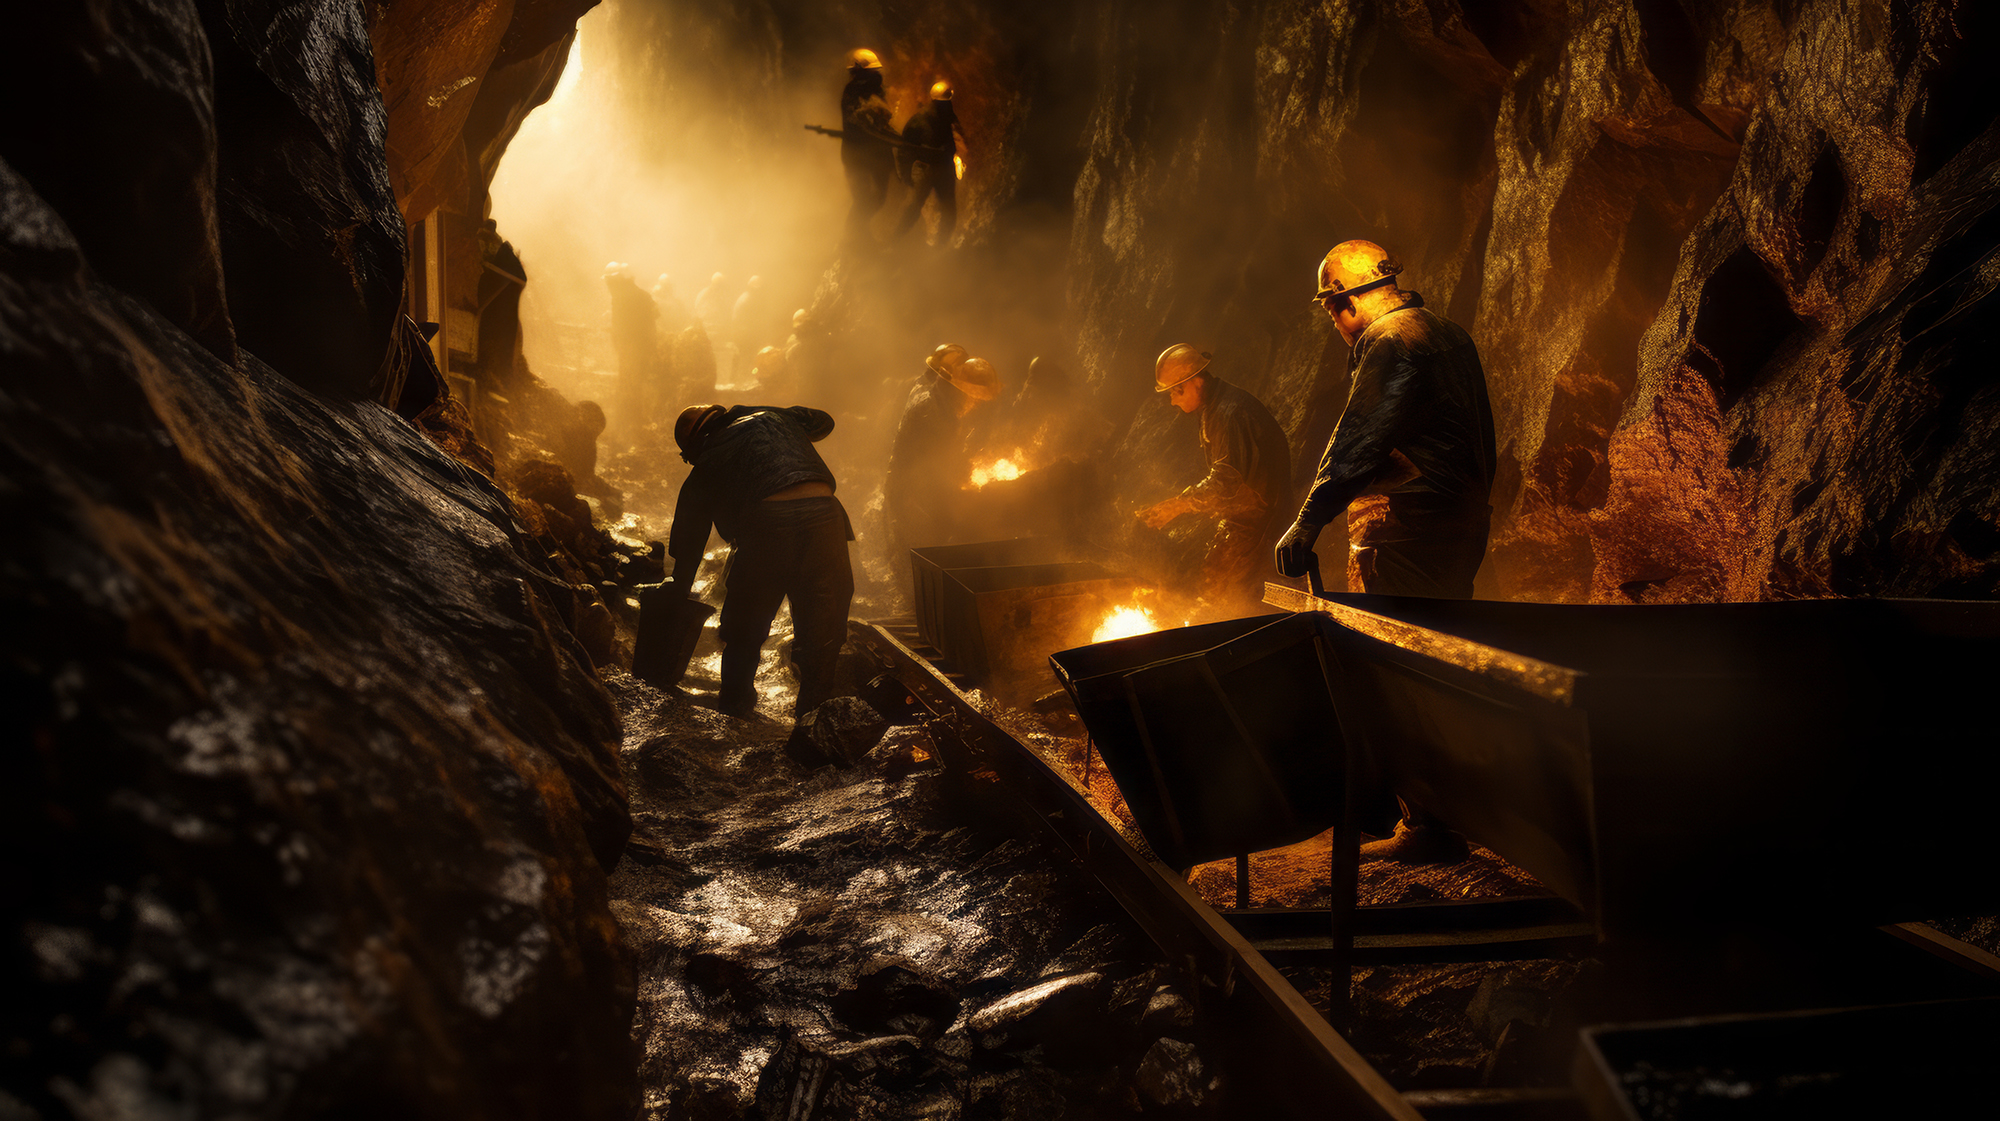 Chapter 5: Impact of Coal Bursts on Mining Operations